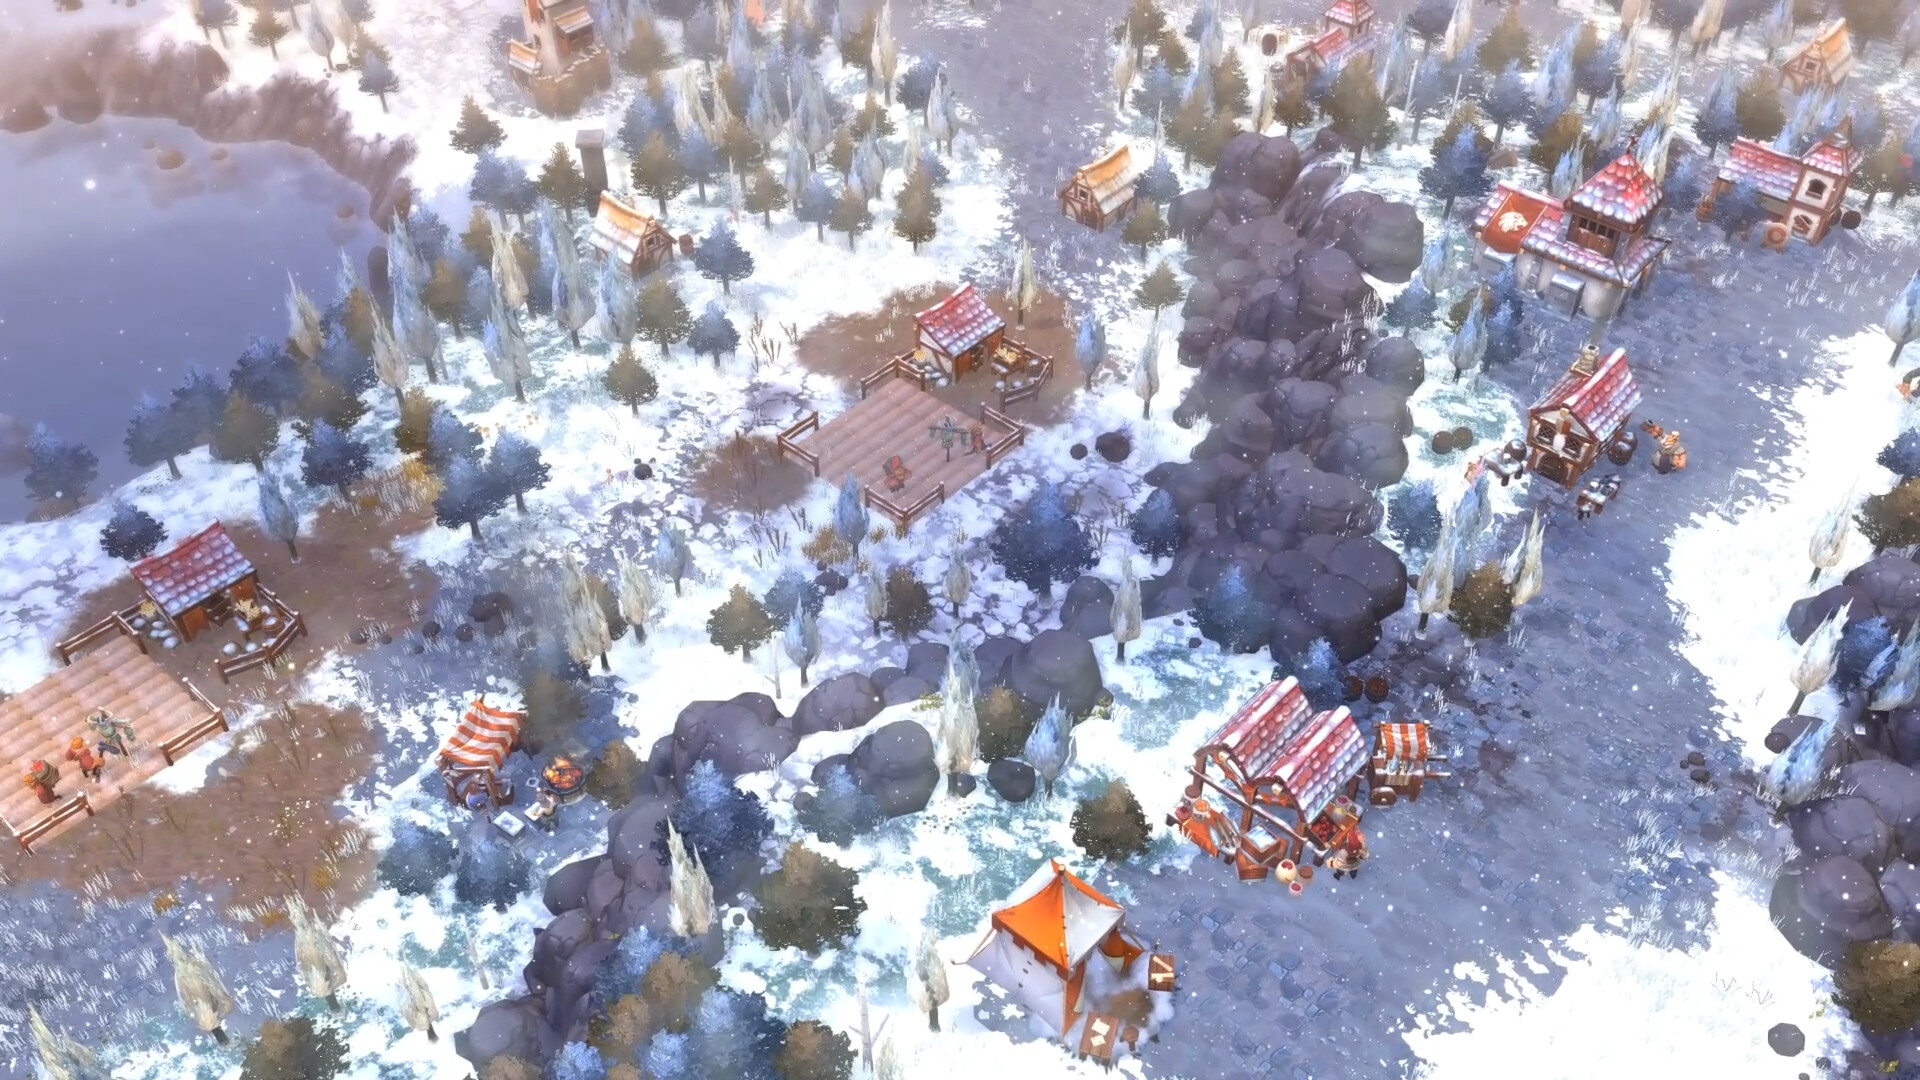 Northgard - Cross of Vidar Expansion Pack Free Download for PC